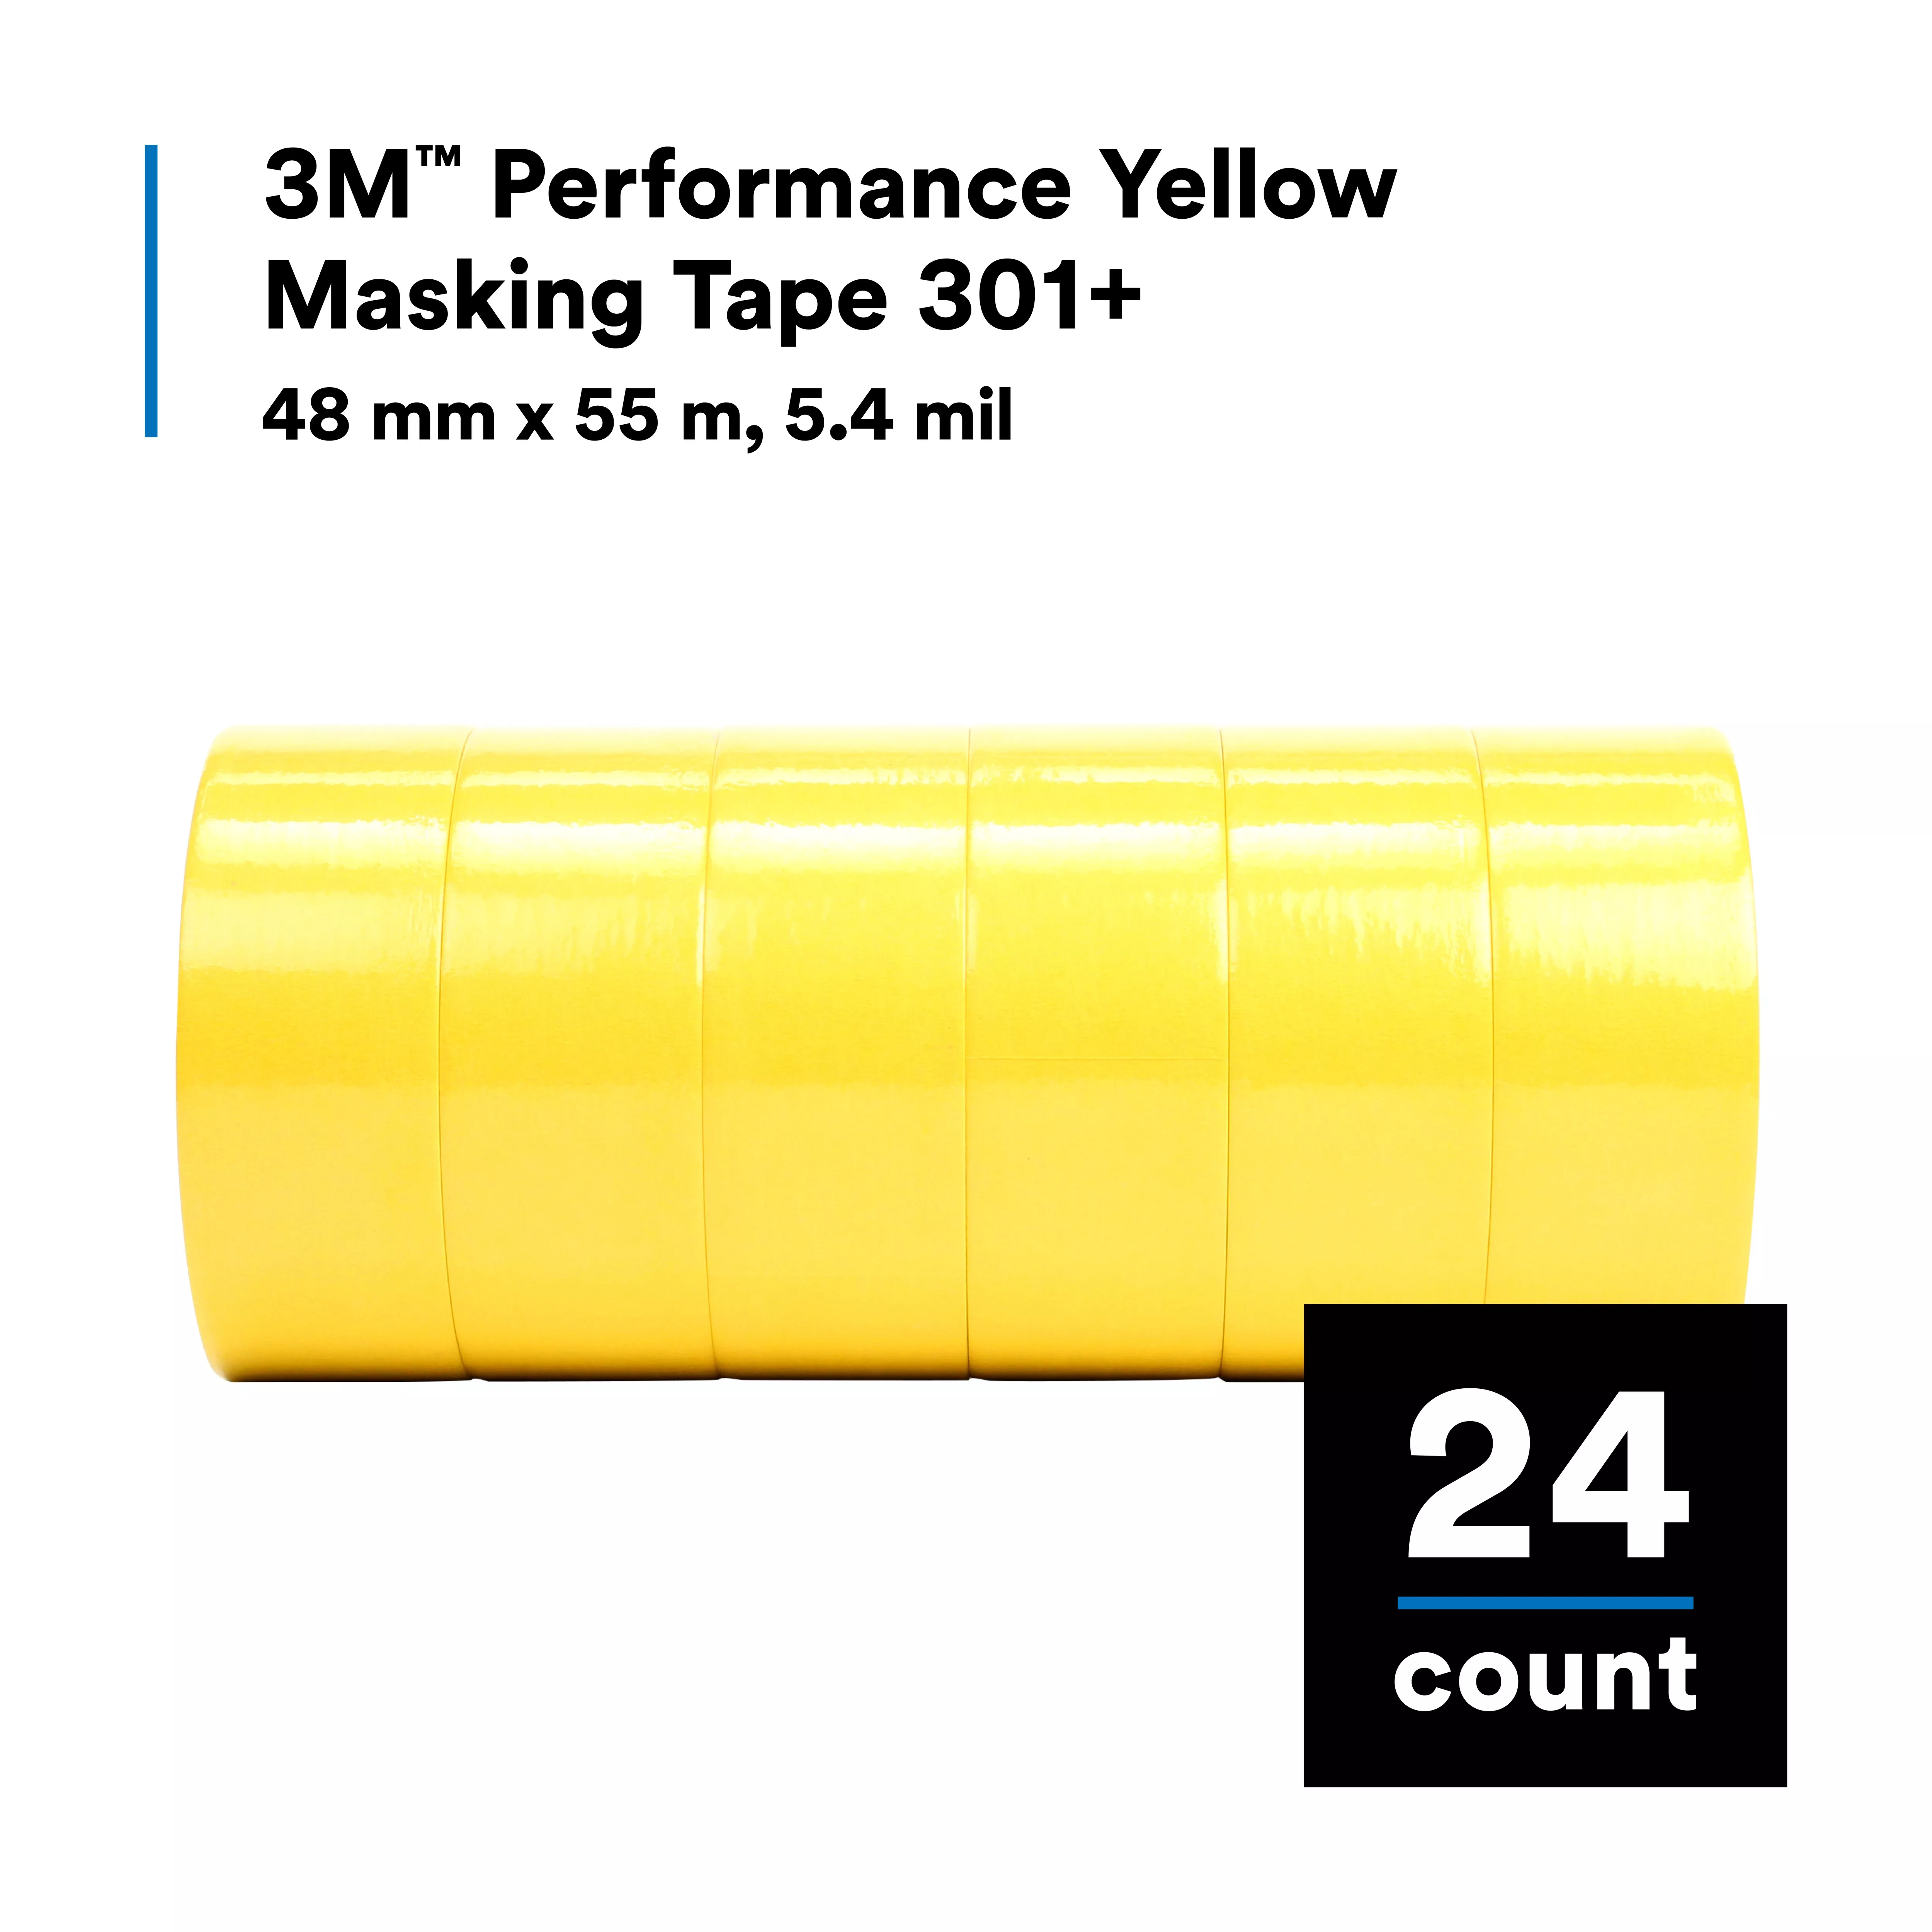 Product Number 301+ | 3M™ Performance Yellow Masking Tape 301+